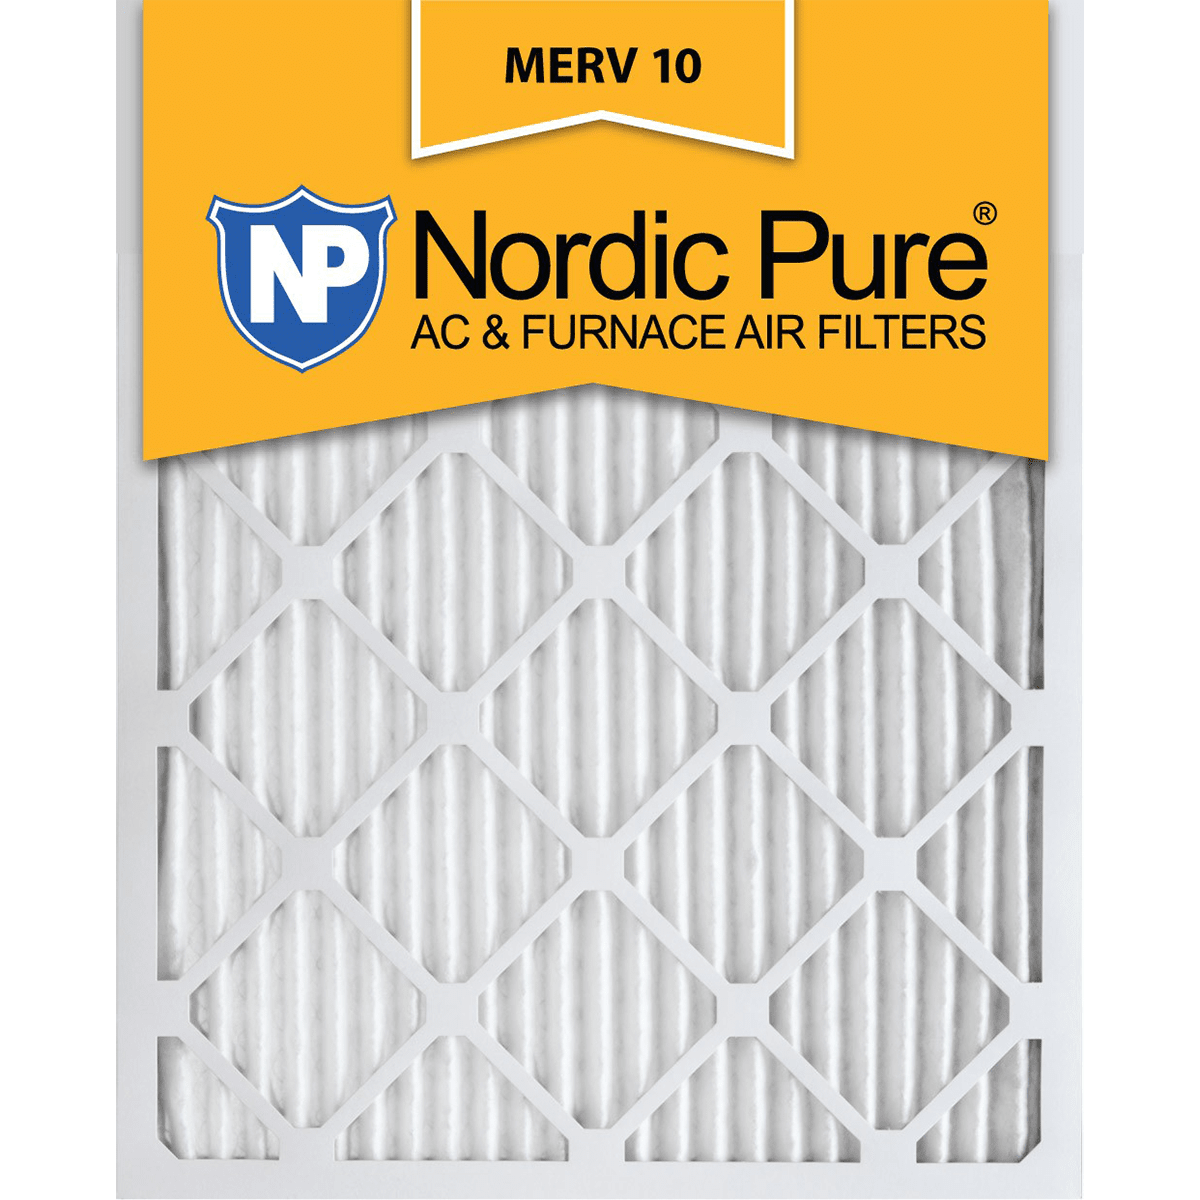 Nordic Pure MERV 10 Pleated FurnaceFilter 16x20x1 6-Pack (16x20x1M10-6)